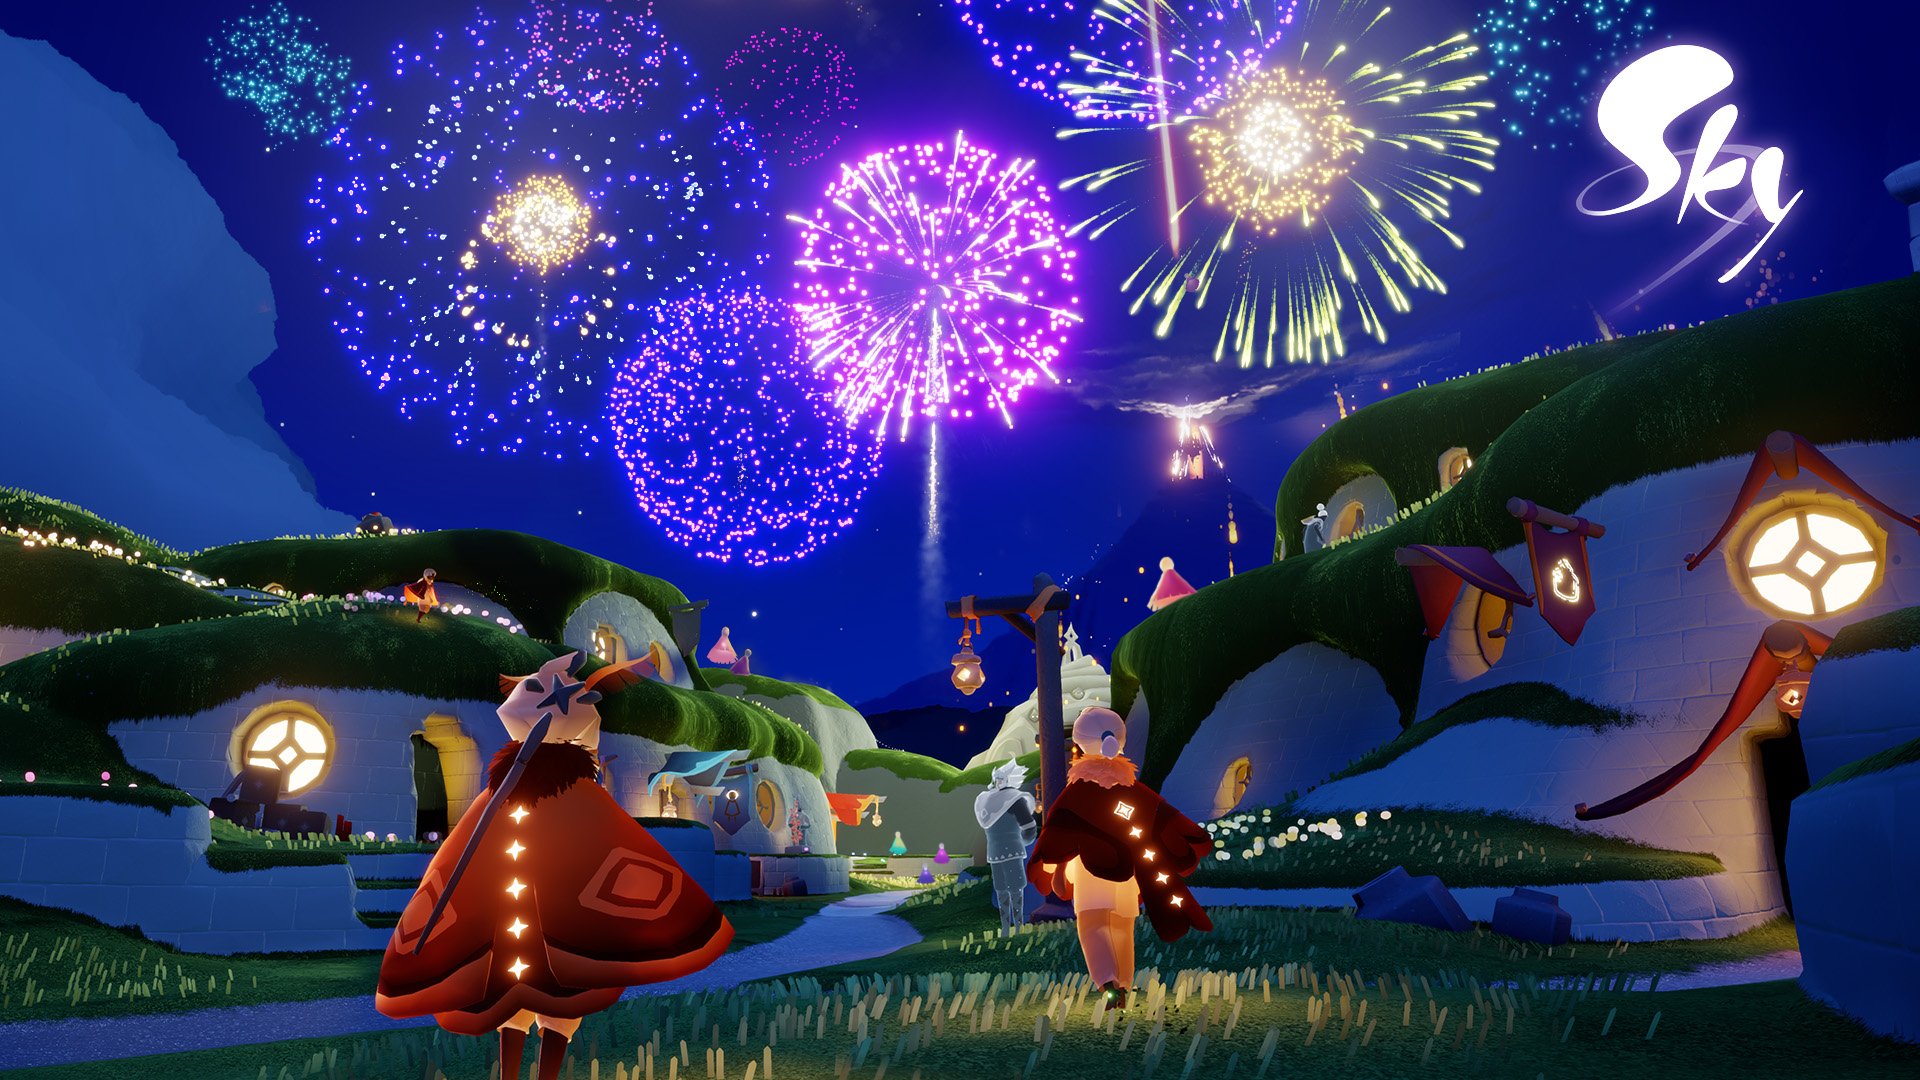 Firework for Nintendo Switch - Nintendo Official Site